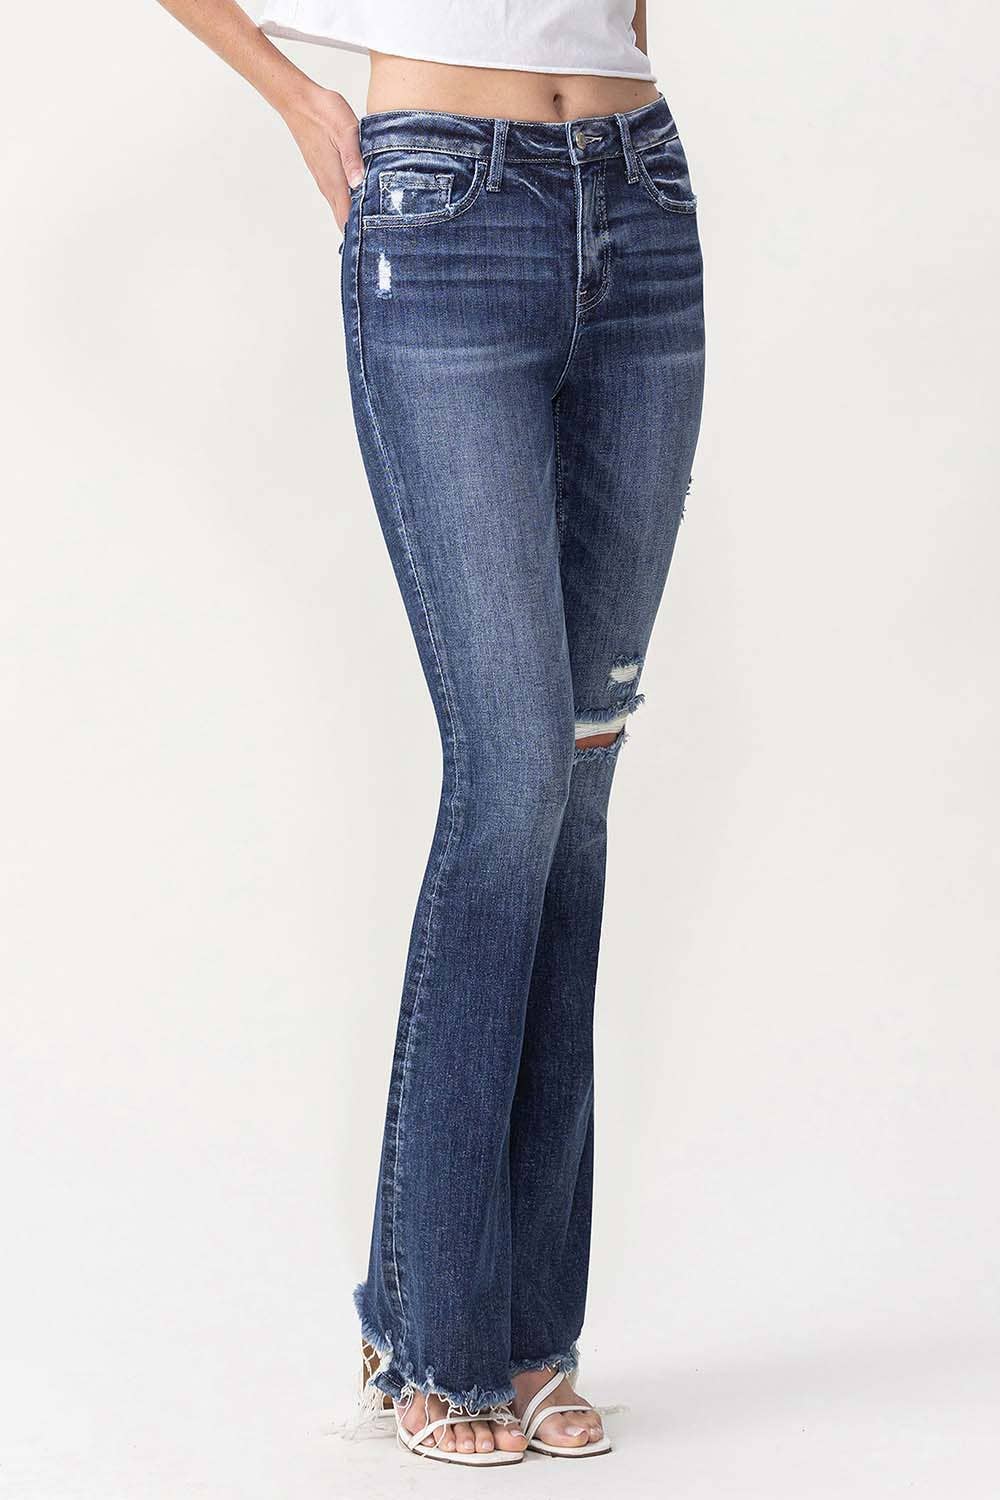 HIGH RISE FLARE JEANS: Dazzle